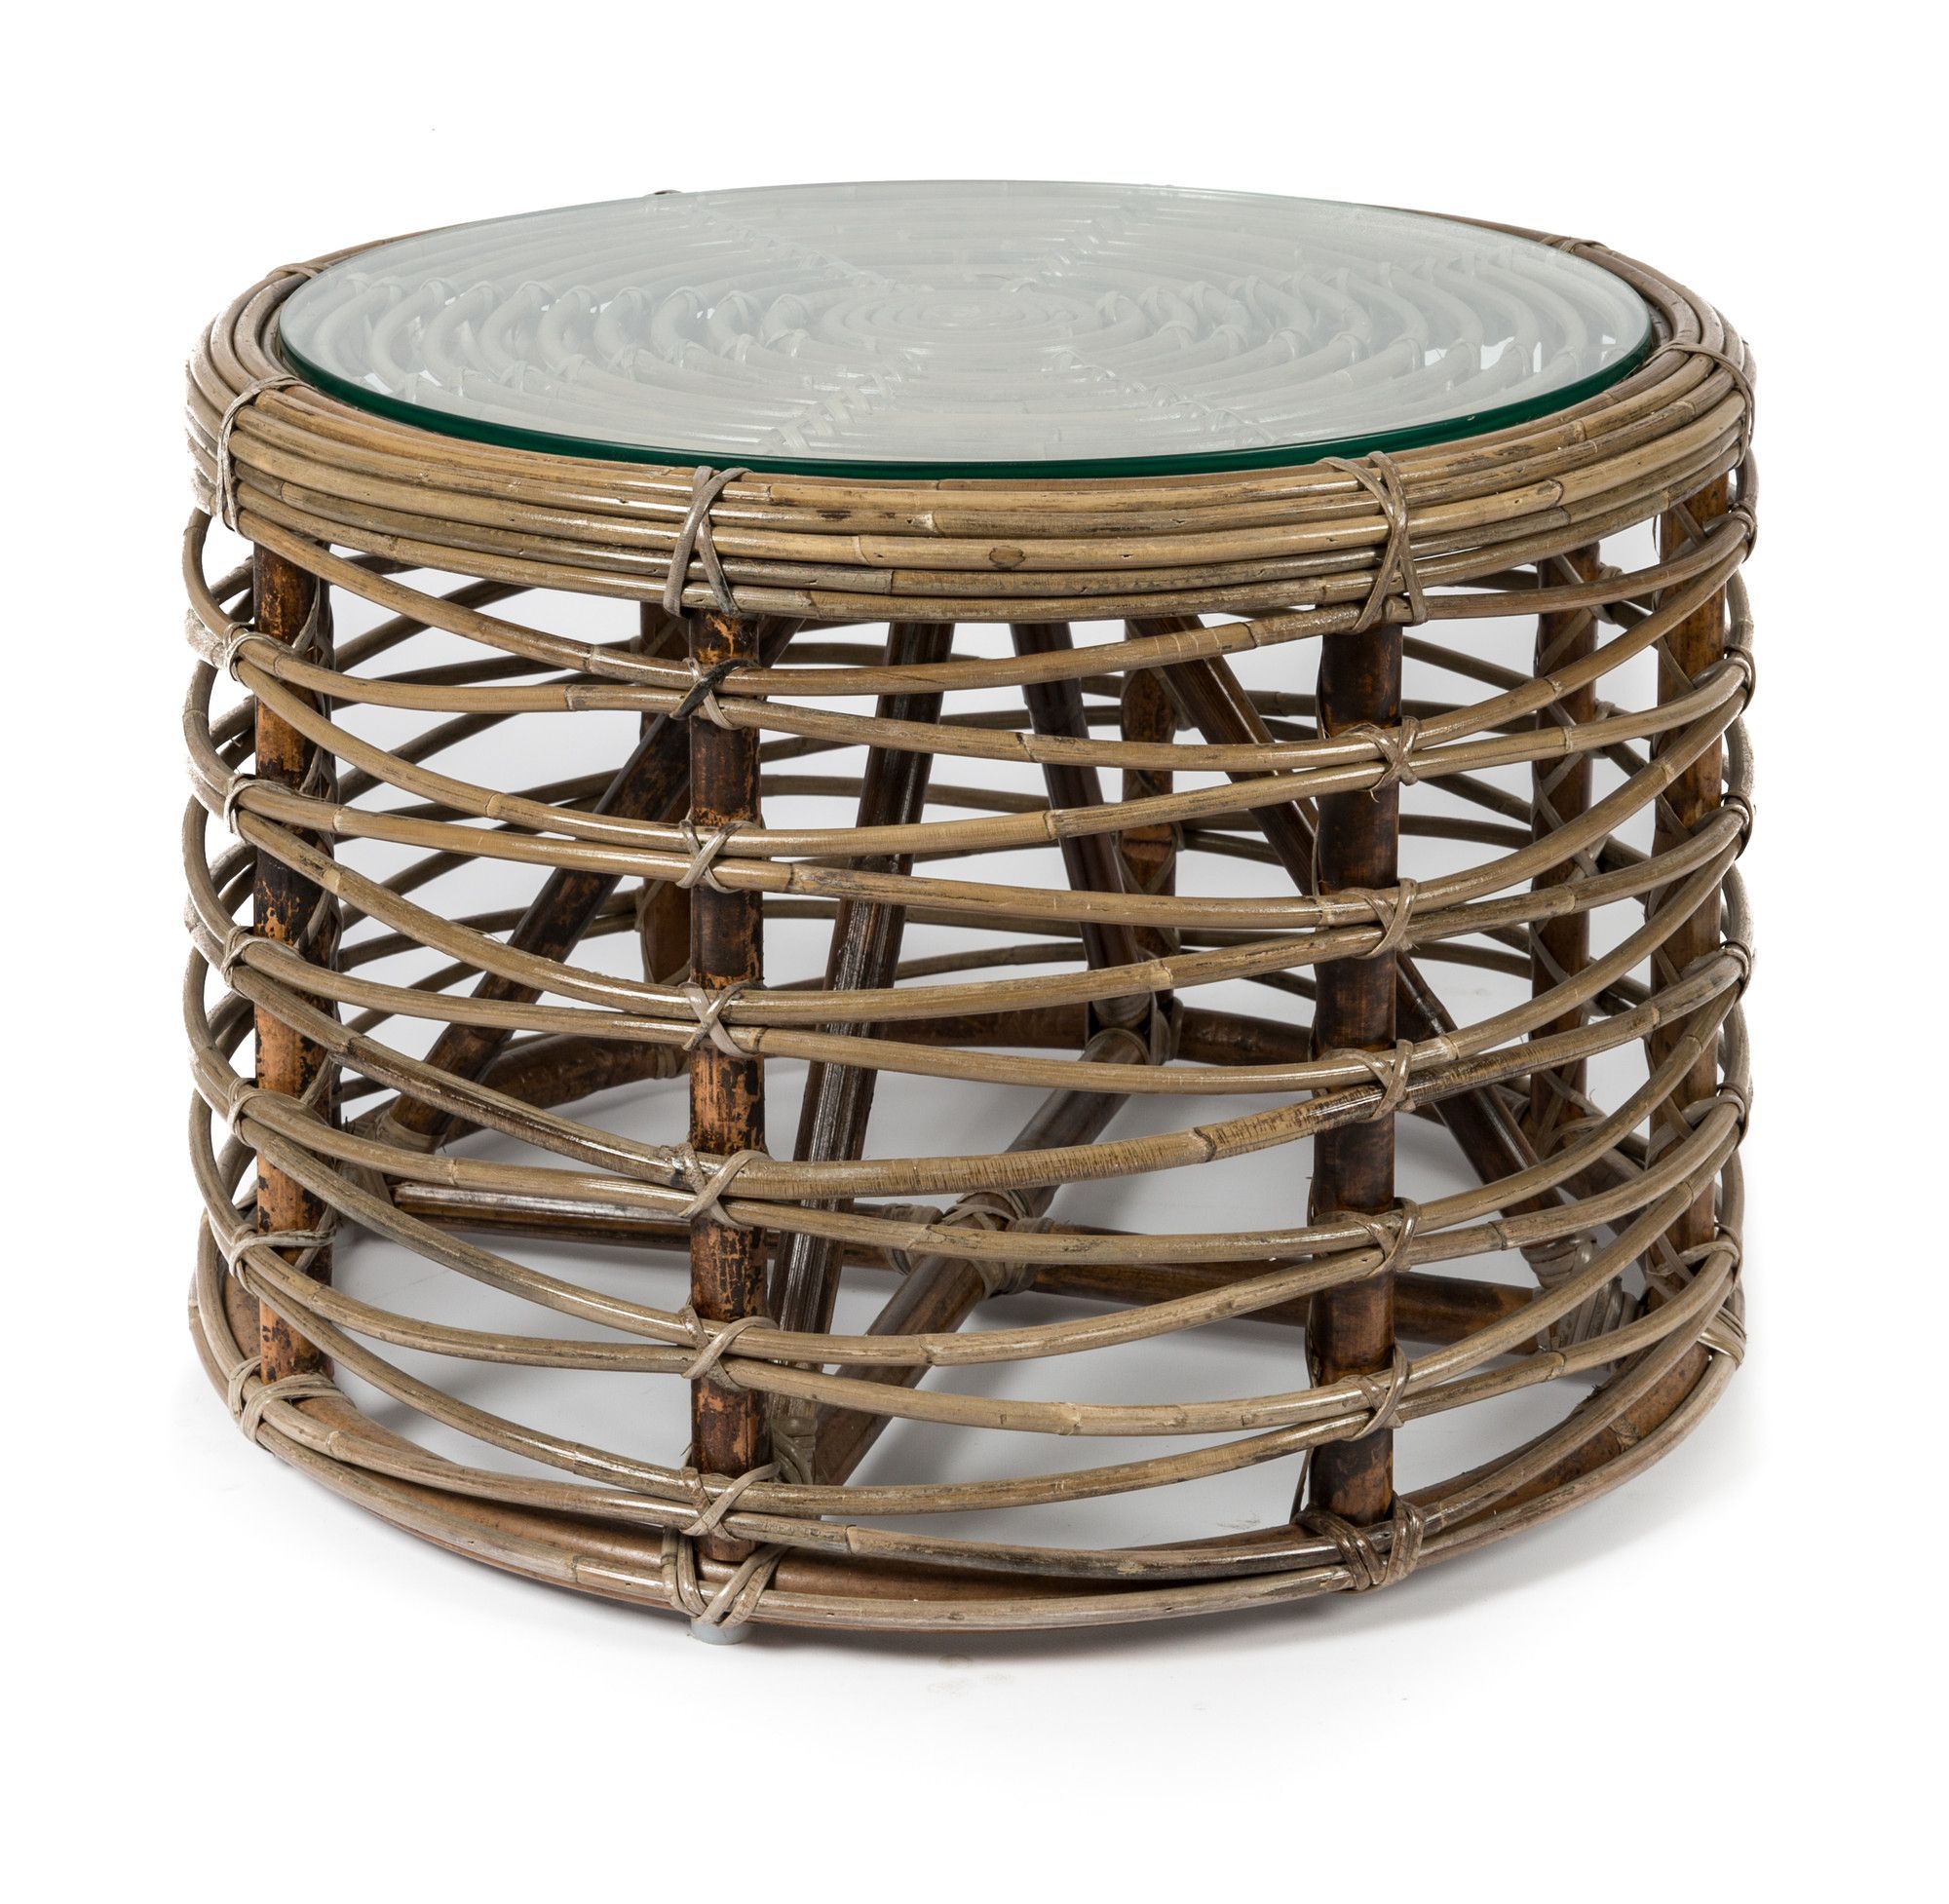 New Santiago Woven Rattan Round Coffee Table – Lifestyle Intended For Most Recent Wicker Coffee Tables (View 11 of 20)